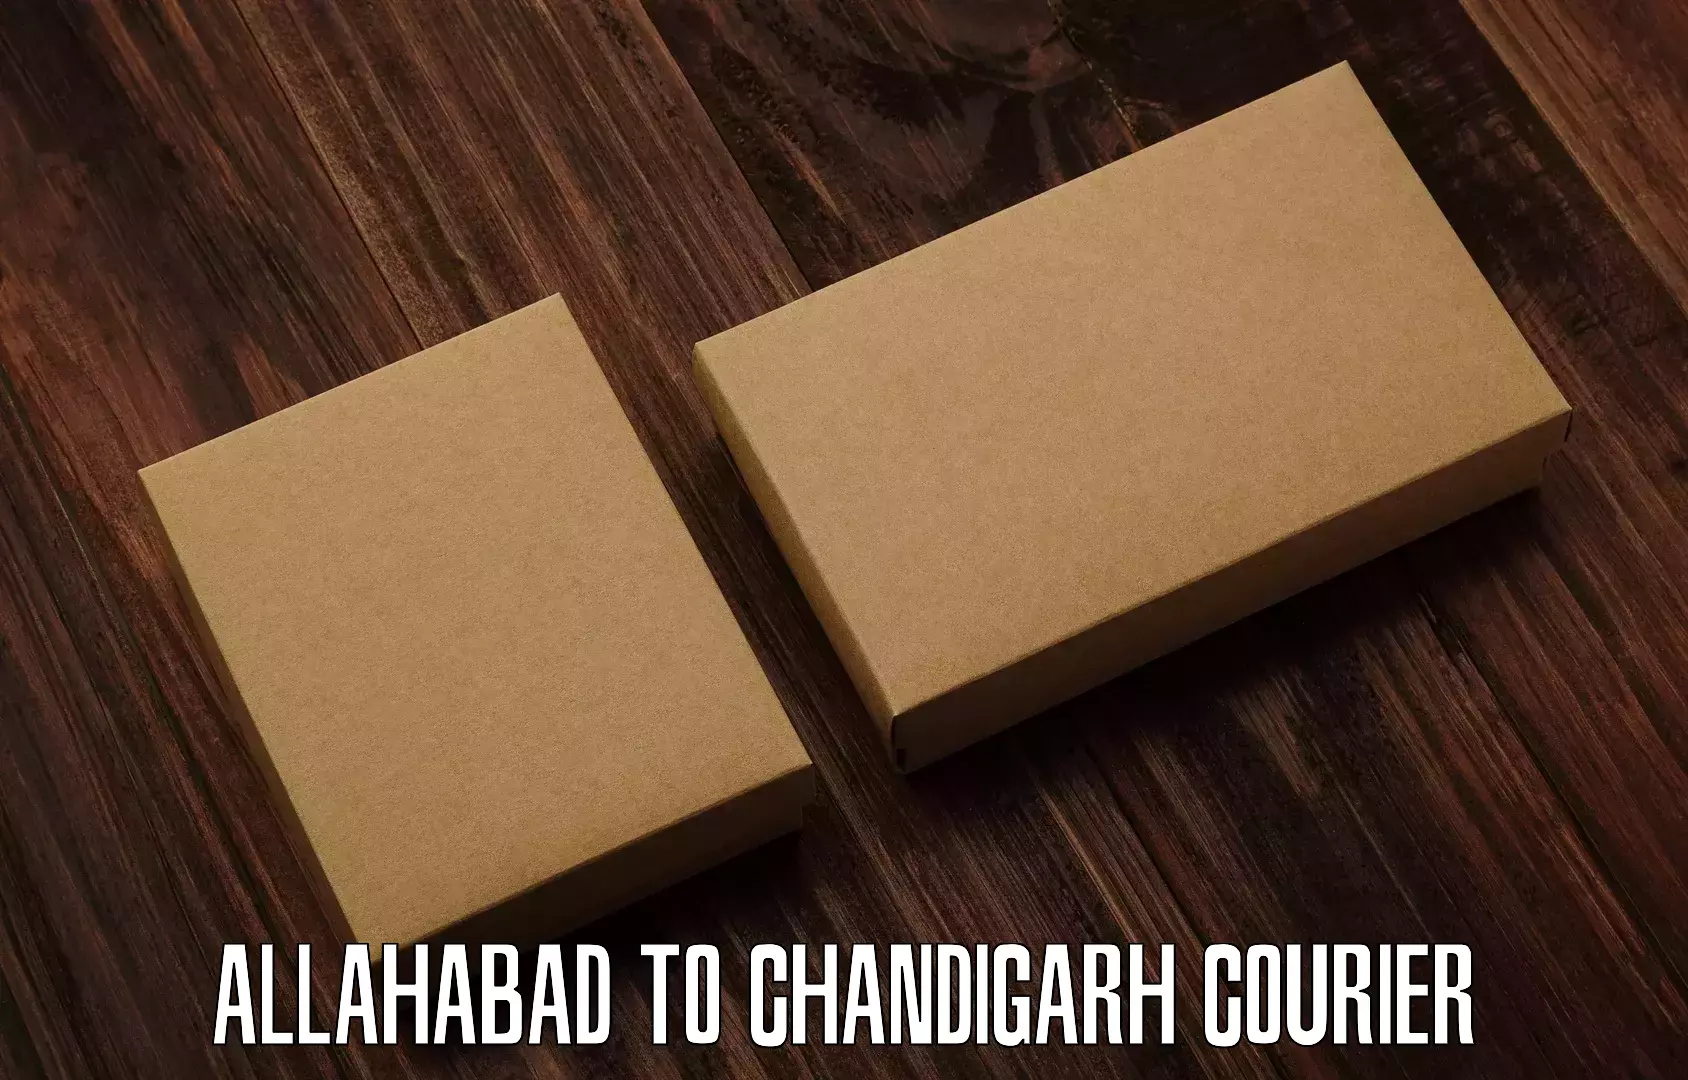 Smart shipping technology Allahabad to Chandigarh